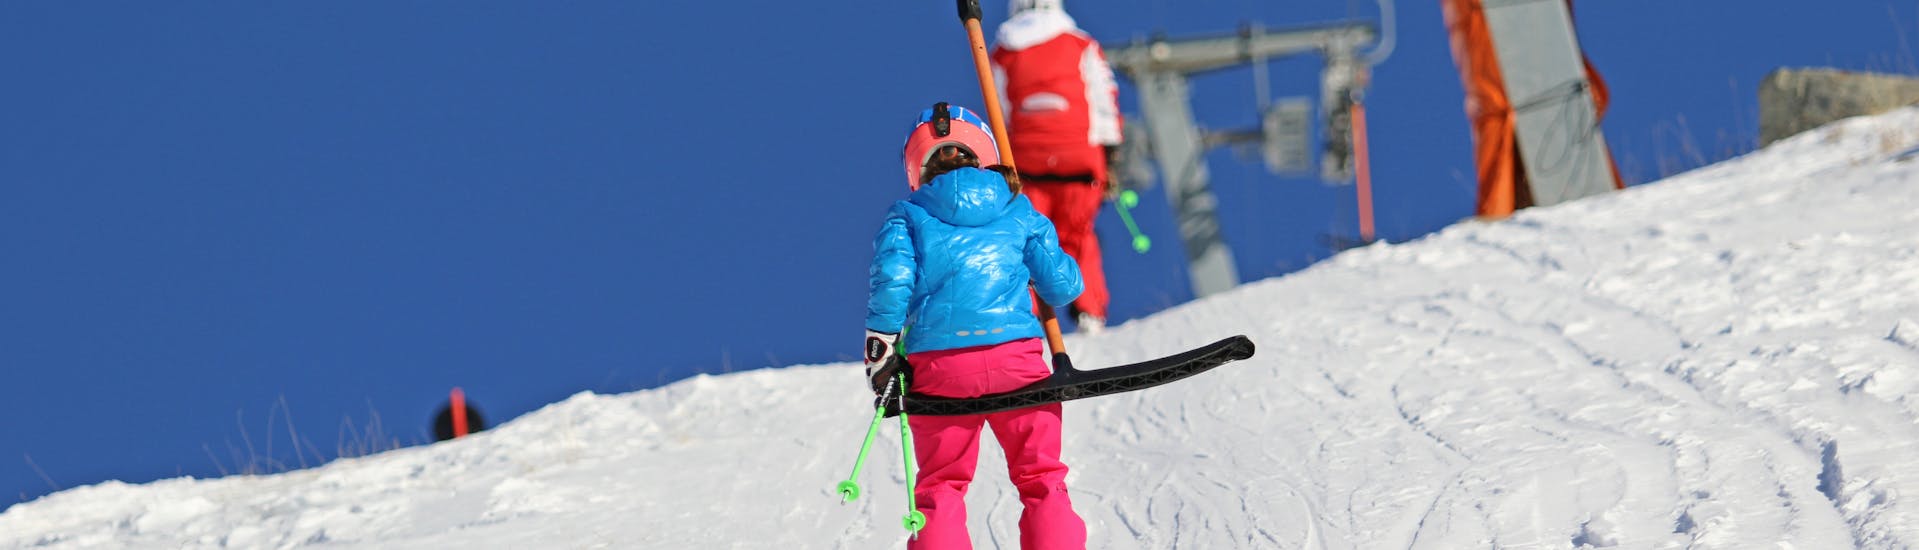 Kids Ski Lessons (4-14 y.) + Ski Hire for Advanced Skiers in Nauders with Skischule Pfunds  - Hero image